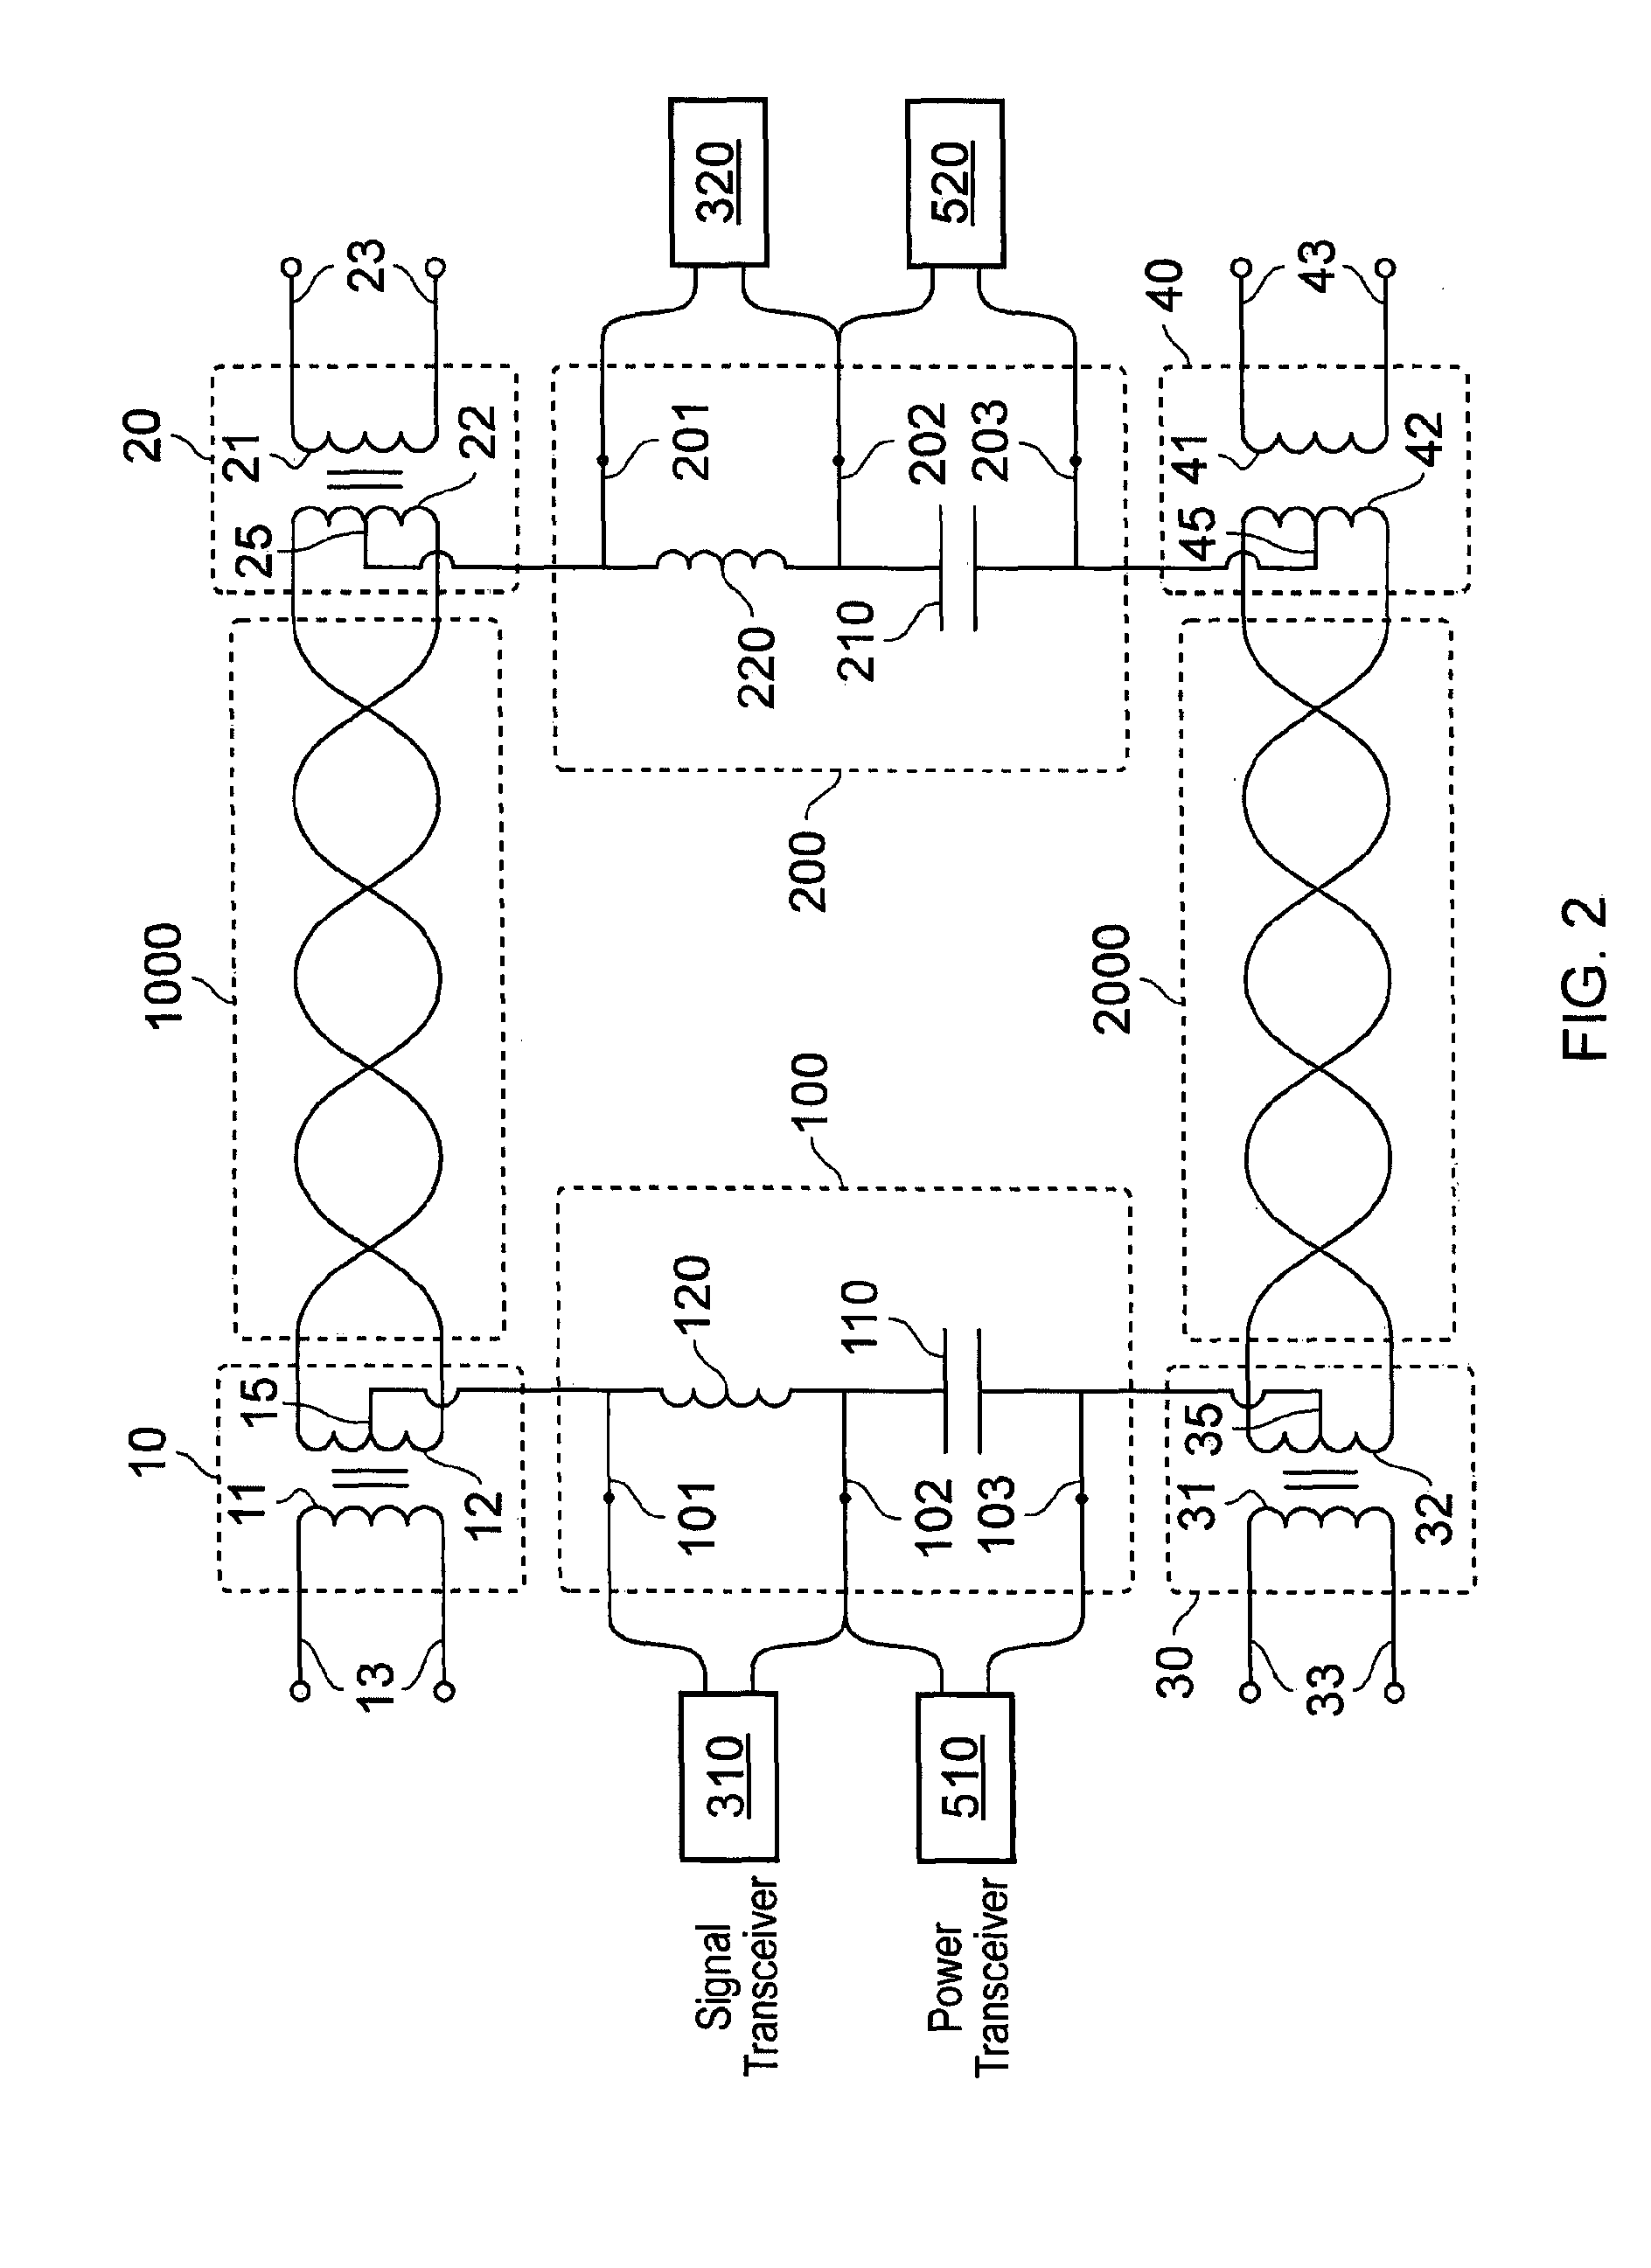 Electrical System Adapted to Transfer Data and Power Between Devices on a Network